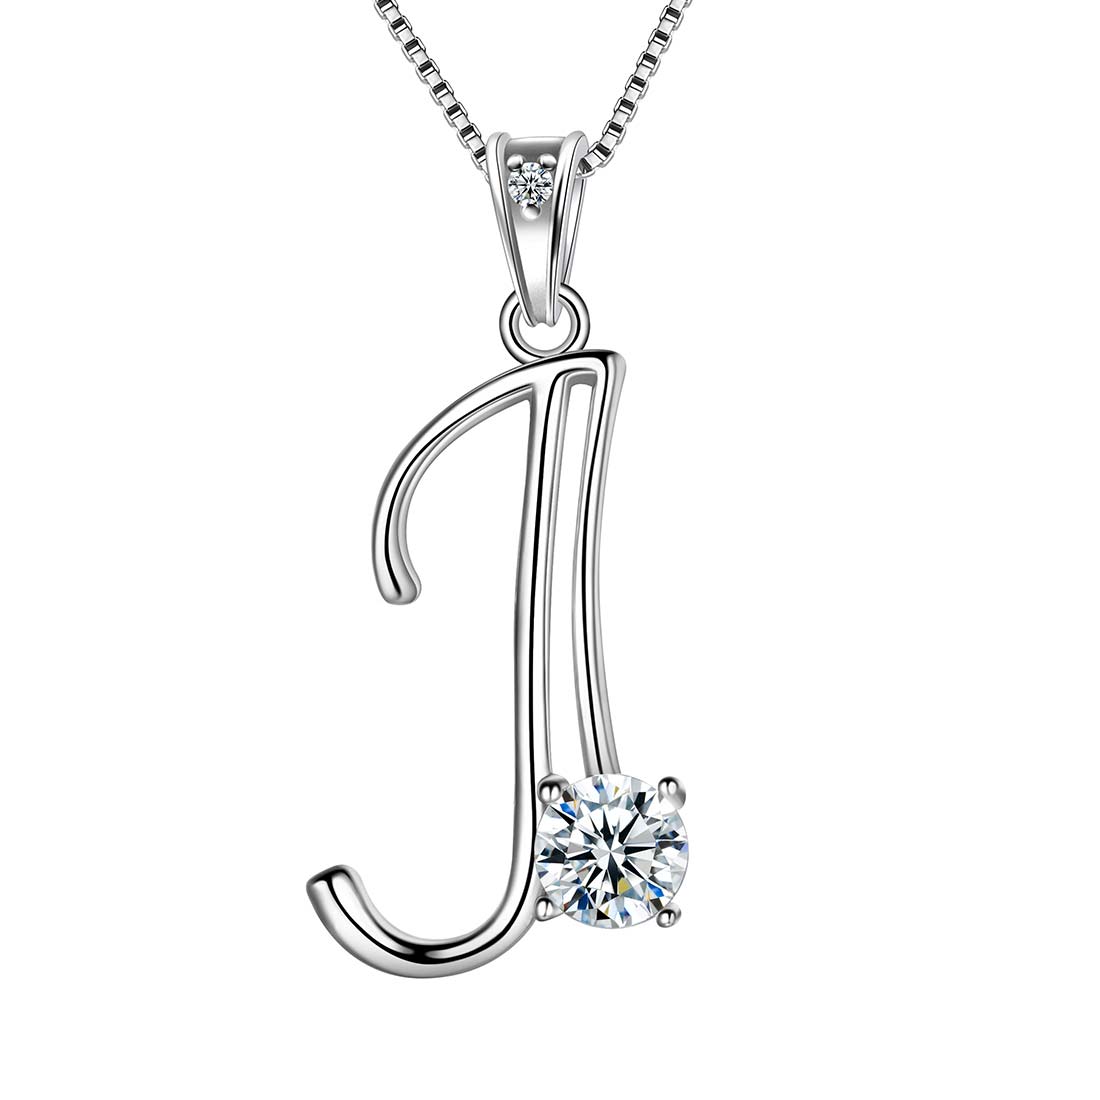 Astrid & Miyu J Initial Pendant Necklace in Silver | King's Cross